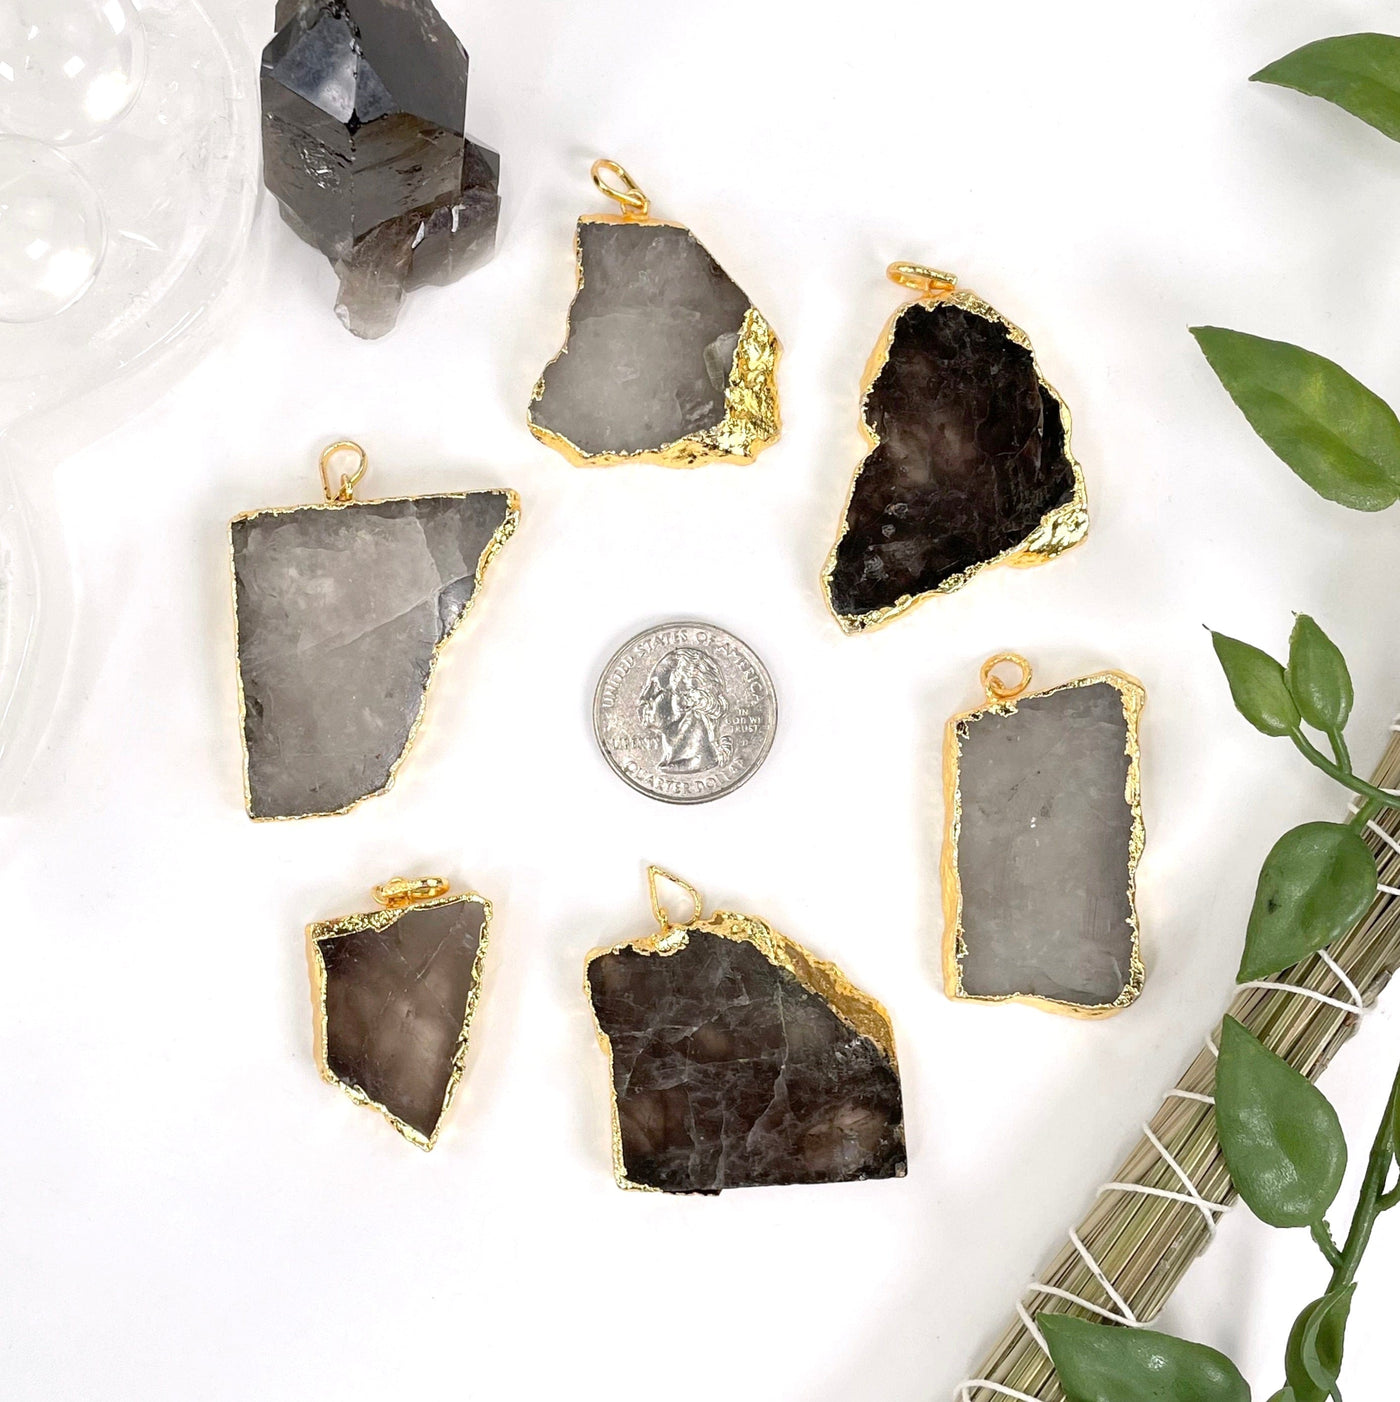 overhead view of six smokey quartz slab pendants on decorated white background with a quarter for size reference